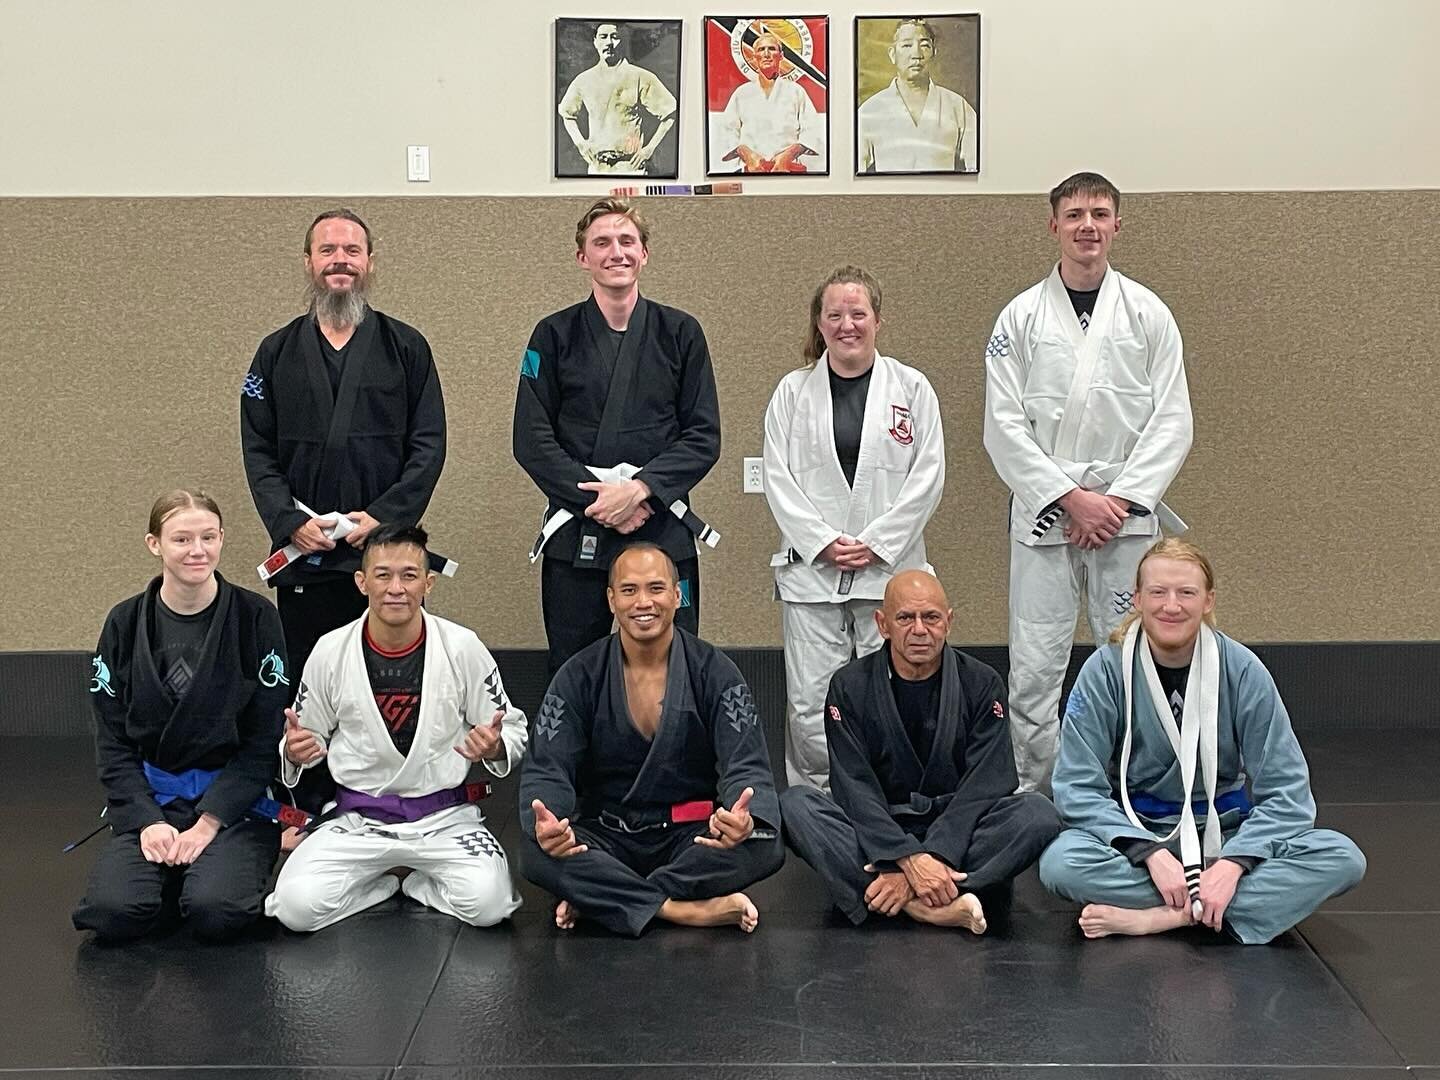 Congratulations to the newest blue belt and new stripes!

Well deserved for you all! Thank you to the team for helping us keep each other accountable and moving forward. 

Great work team 🤙🏽❤️